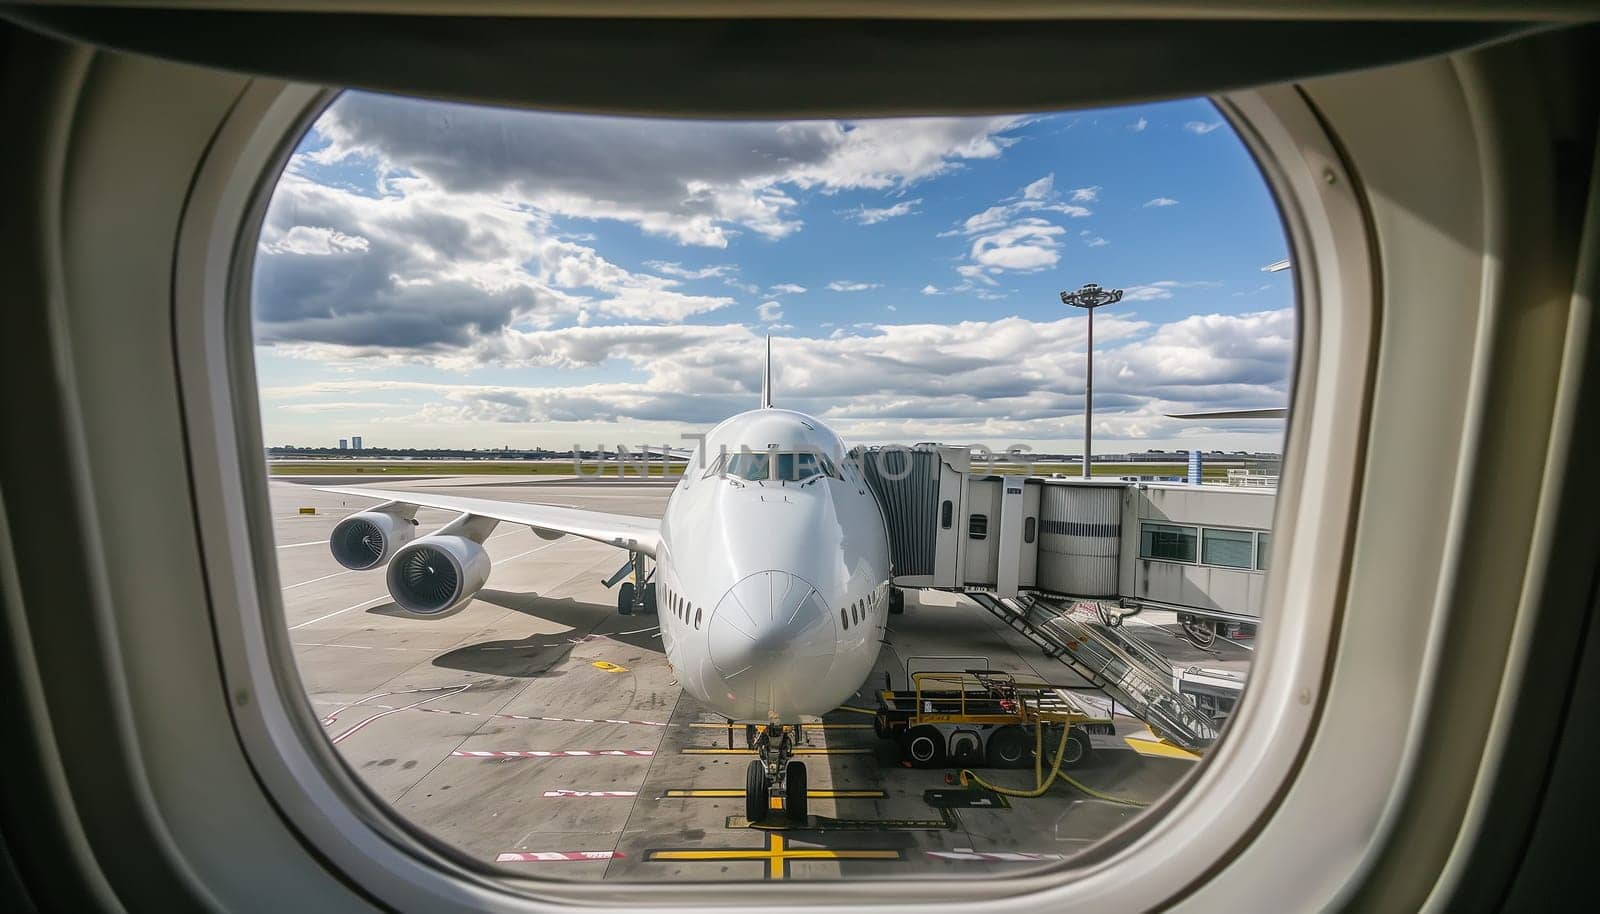 Loading cargo on the plane in airport, view through window.